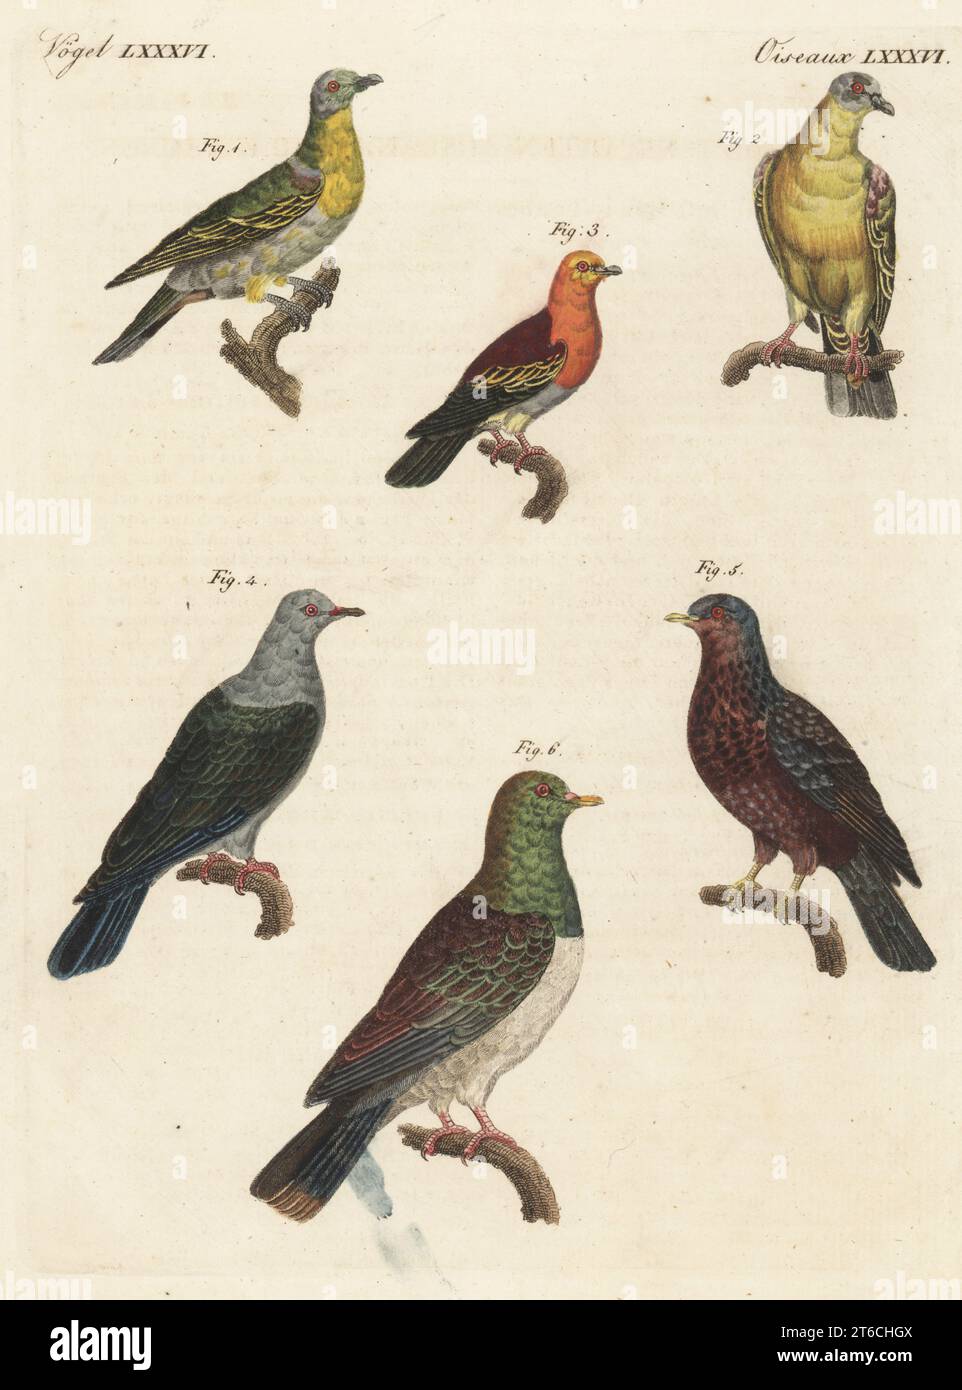 Yellow-footed green pigeon, Treron phoenicopterus, male 1, female 2, Buru green pigeon, Treron aromaticus 3, Green imperial pigeon, Ducula aenea 4, African olive pigeon, . Columba arquatrix 5 and extinct Norfolk Island pigeon,. Hemiphaga spadicea 6. Copied from Madame Pauline Knip's Les Pigeons, 1811. Handcoloured copperplate engraving from Carl Bertuch's Bilderbuch fur Kinder (Picture Book for Children), Weimar, 1813. A 12-volume encyclopedia for children illustrated with almost 1,200 engraved plates on natural history, science, costume, mythology, etc., published from 1790-1830. Stock Photo